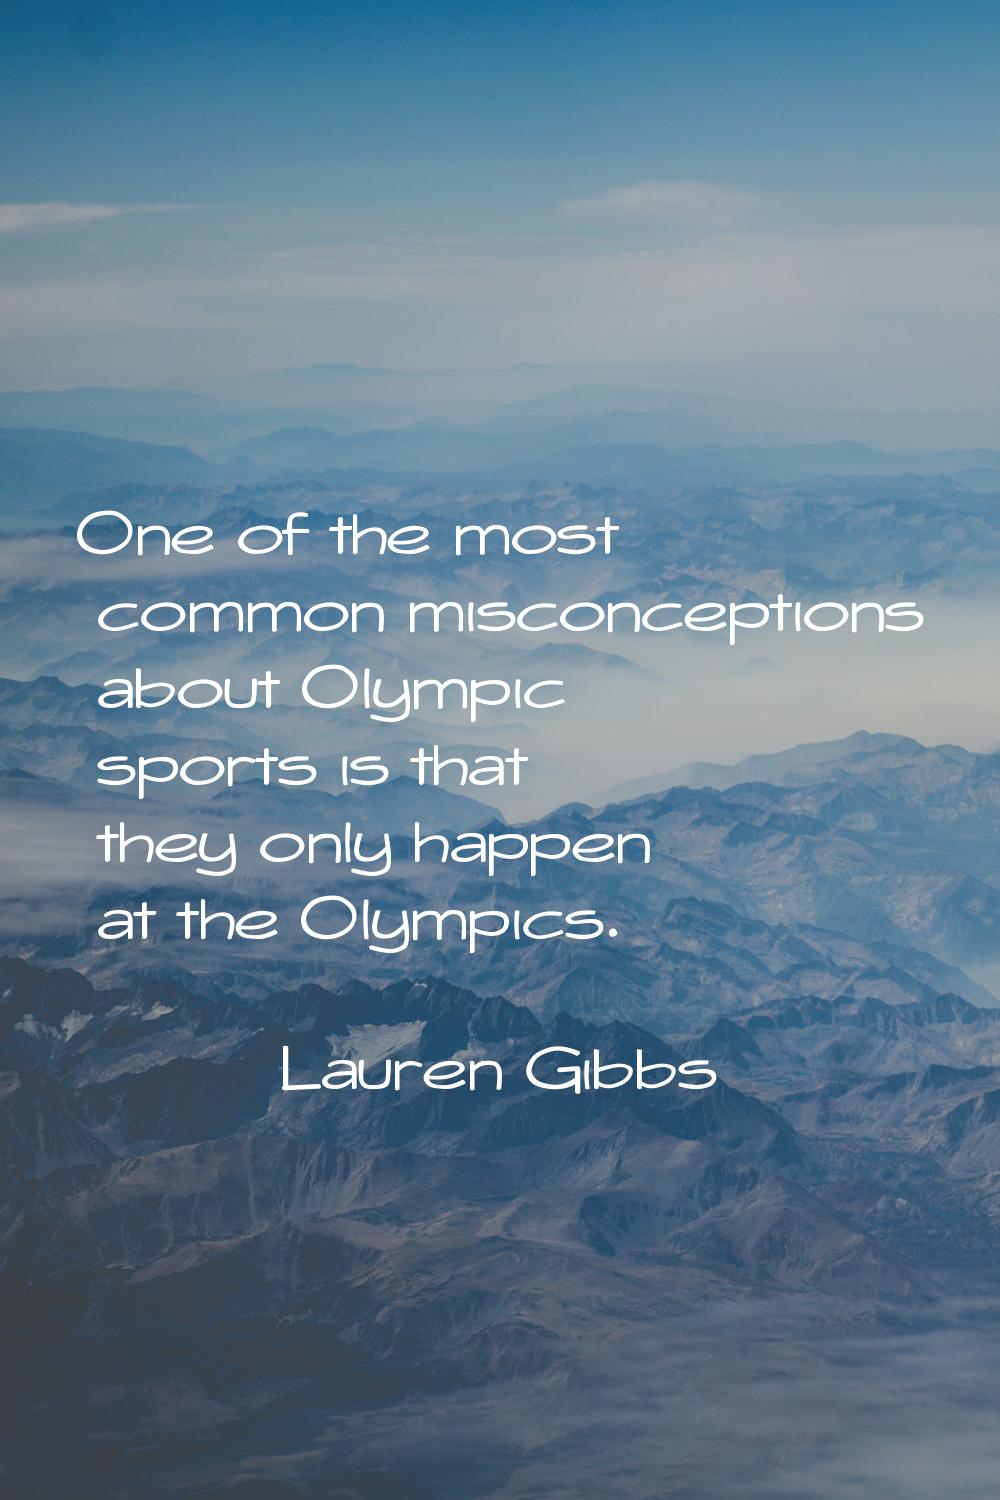 One of the most common misconceptions about Olympic sports is that they only happen at the Olympics